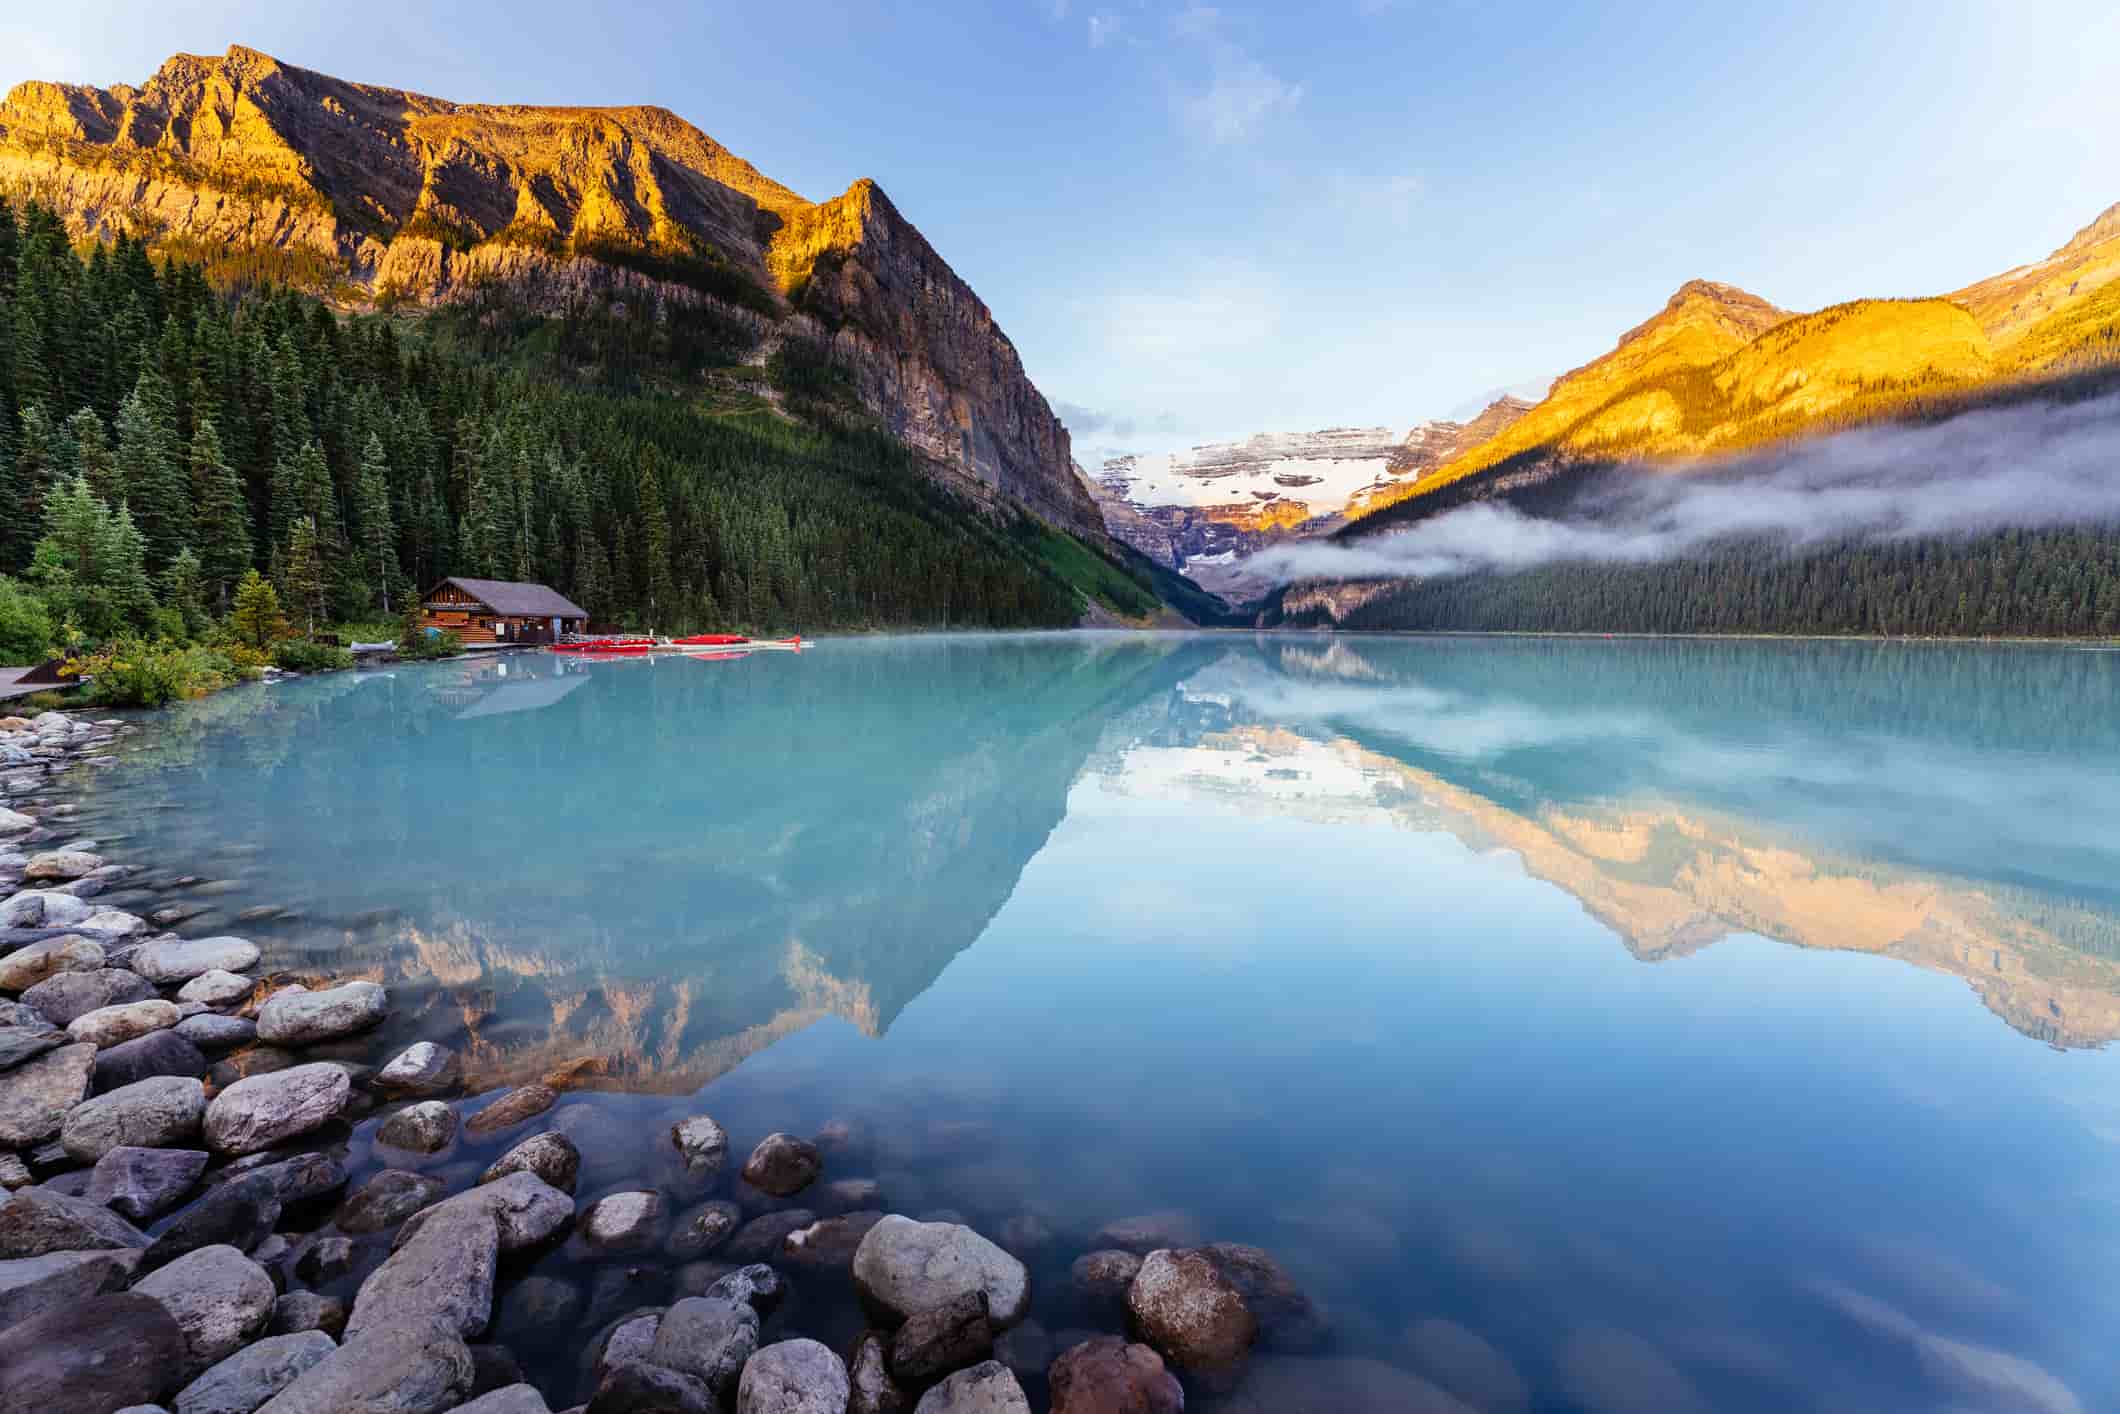 Top 5 Things to do on a Visit to Banff